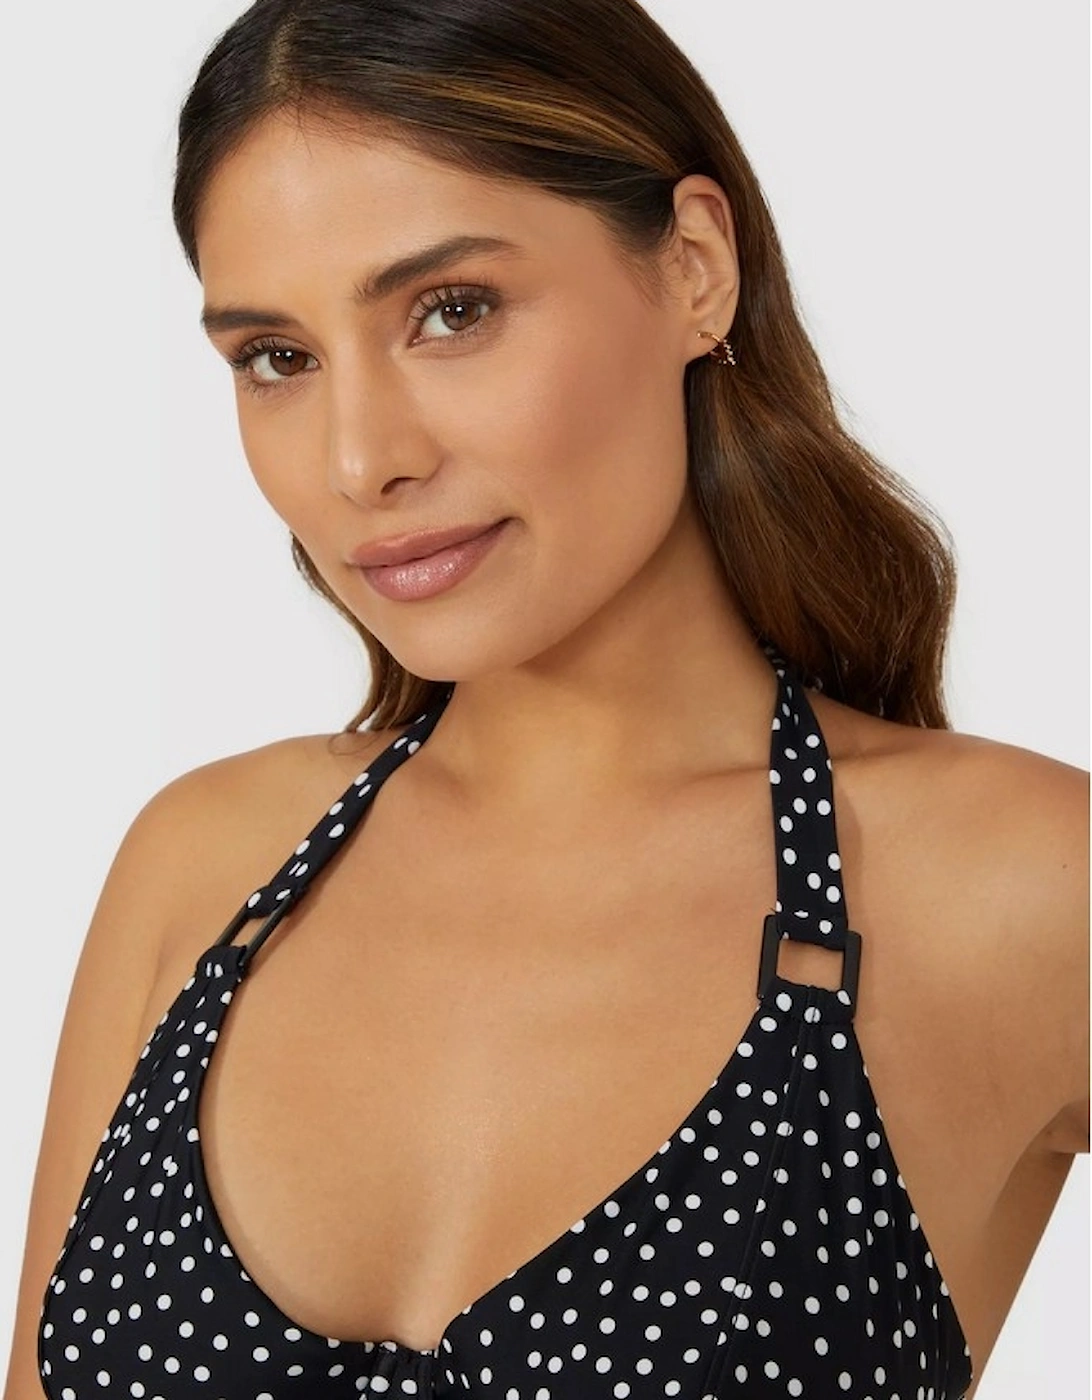 Womens/Ladies Spotted Non-Padded Tankini Top